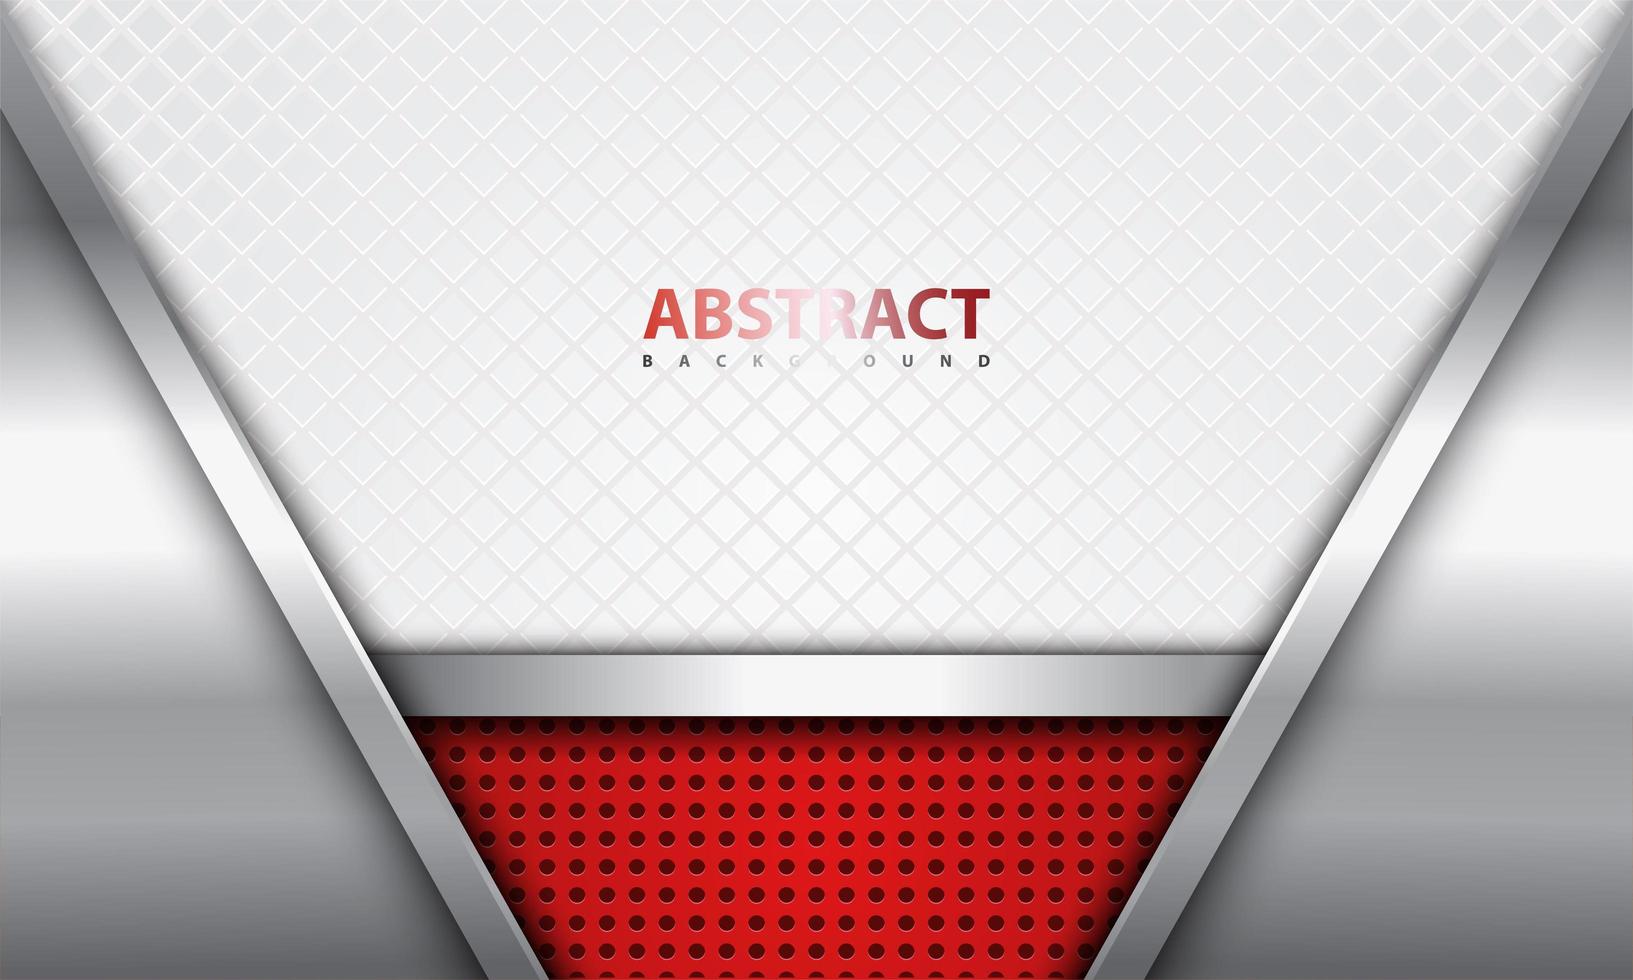 Realistic Steel and Red Design with Fencing Wire Pattern vector